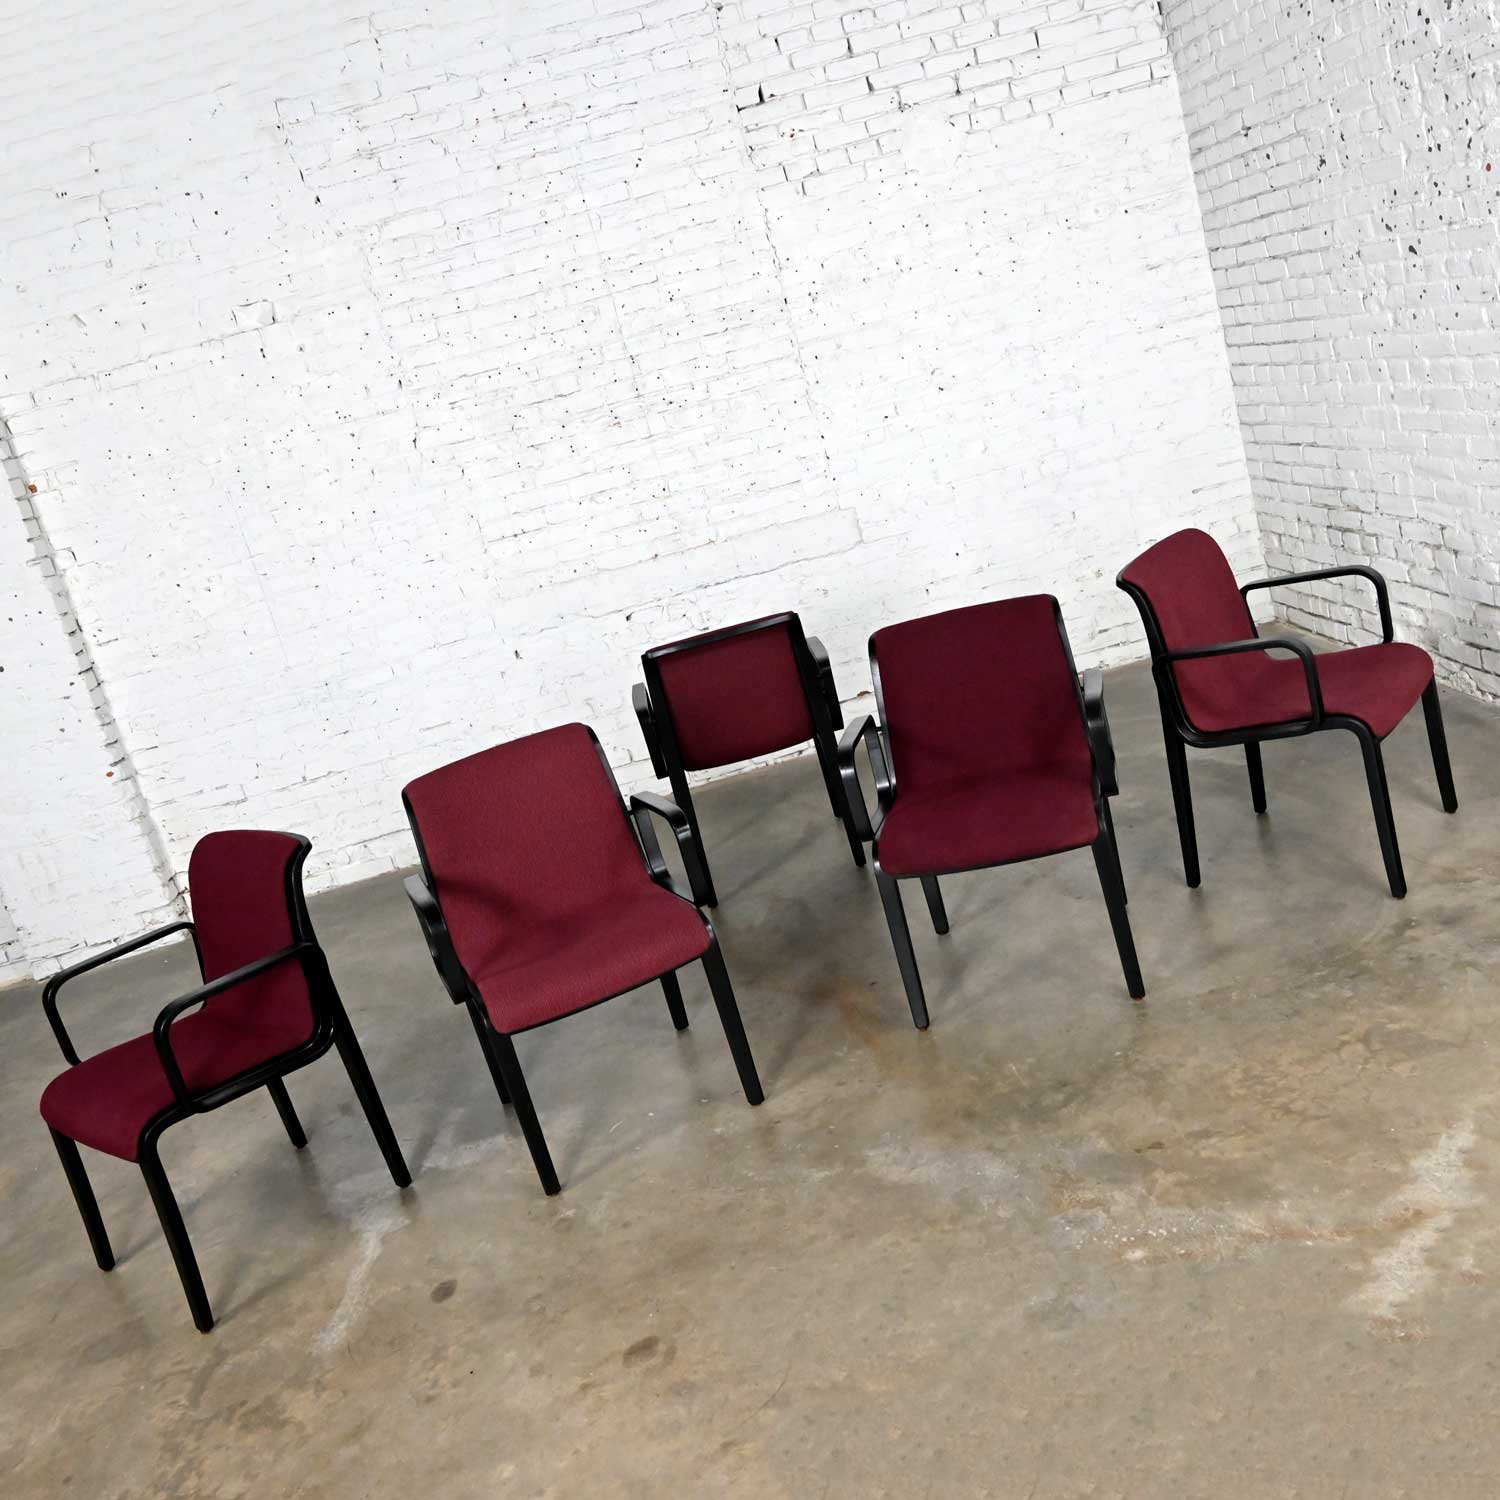 Vintage MCM Bentwood 1300 Series Dining Chairs Maroon Fabric & Black Frames by Bill Stephens for Knoll Set of 5